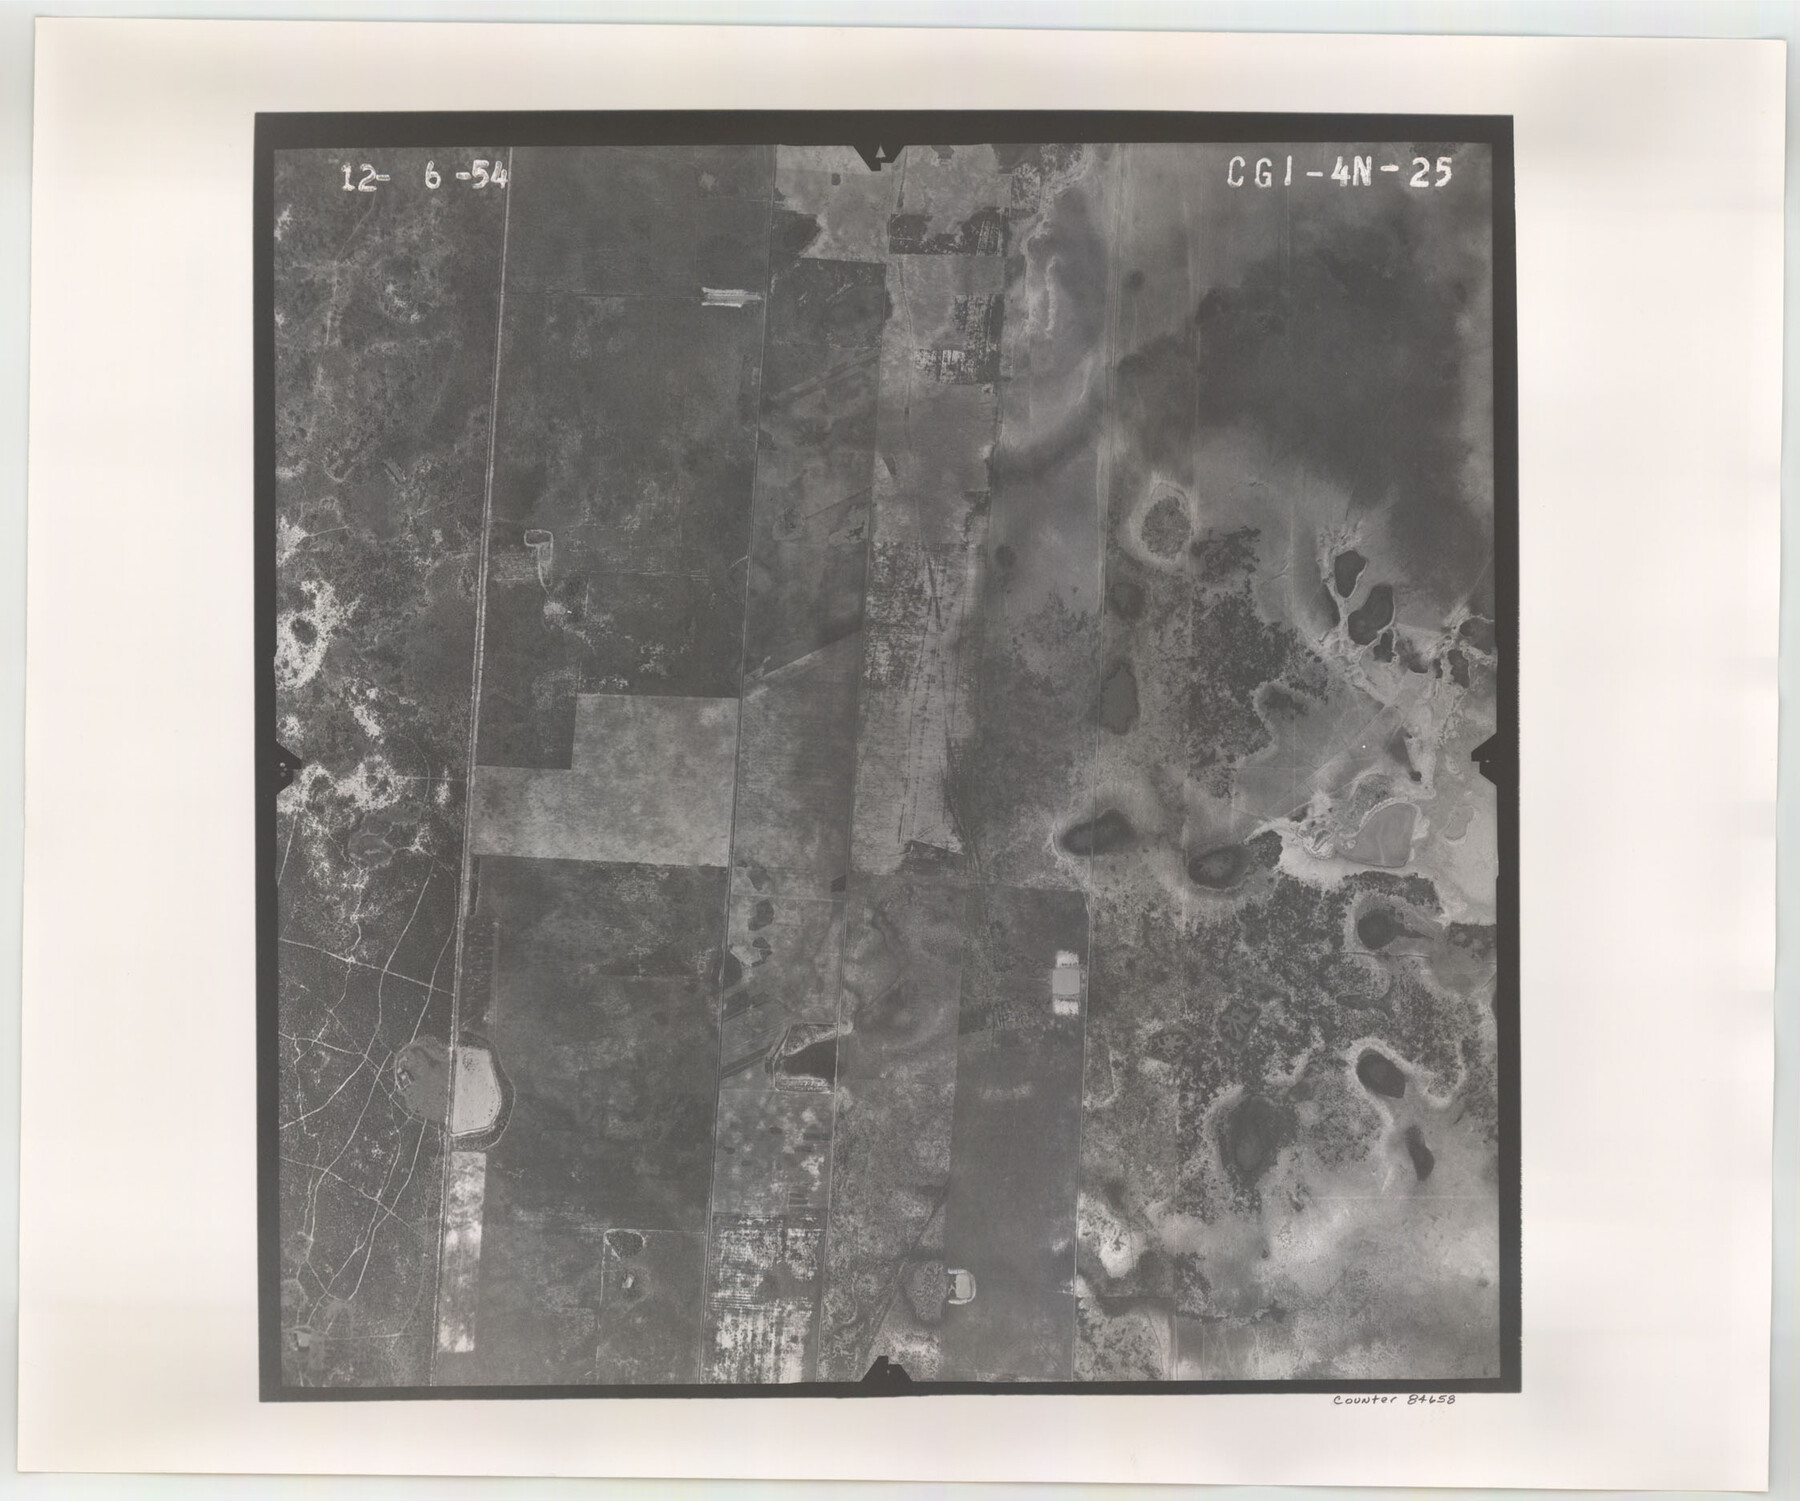 84658, Flight Mission No. CGI-4N, Frame 25, Cameron County, General Map Collection